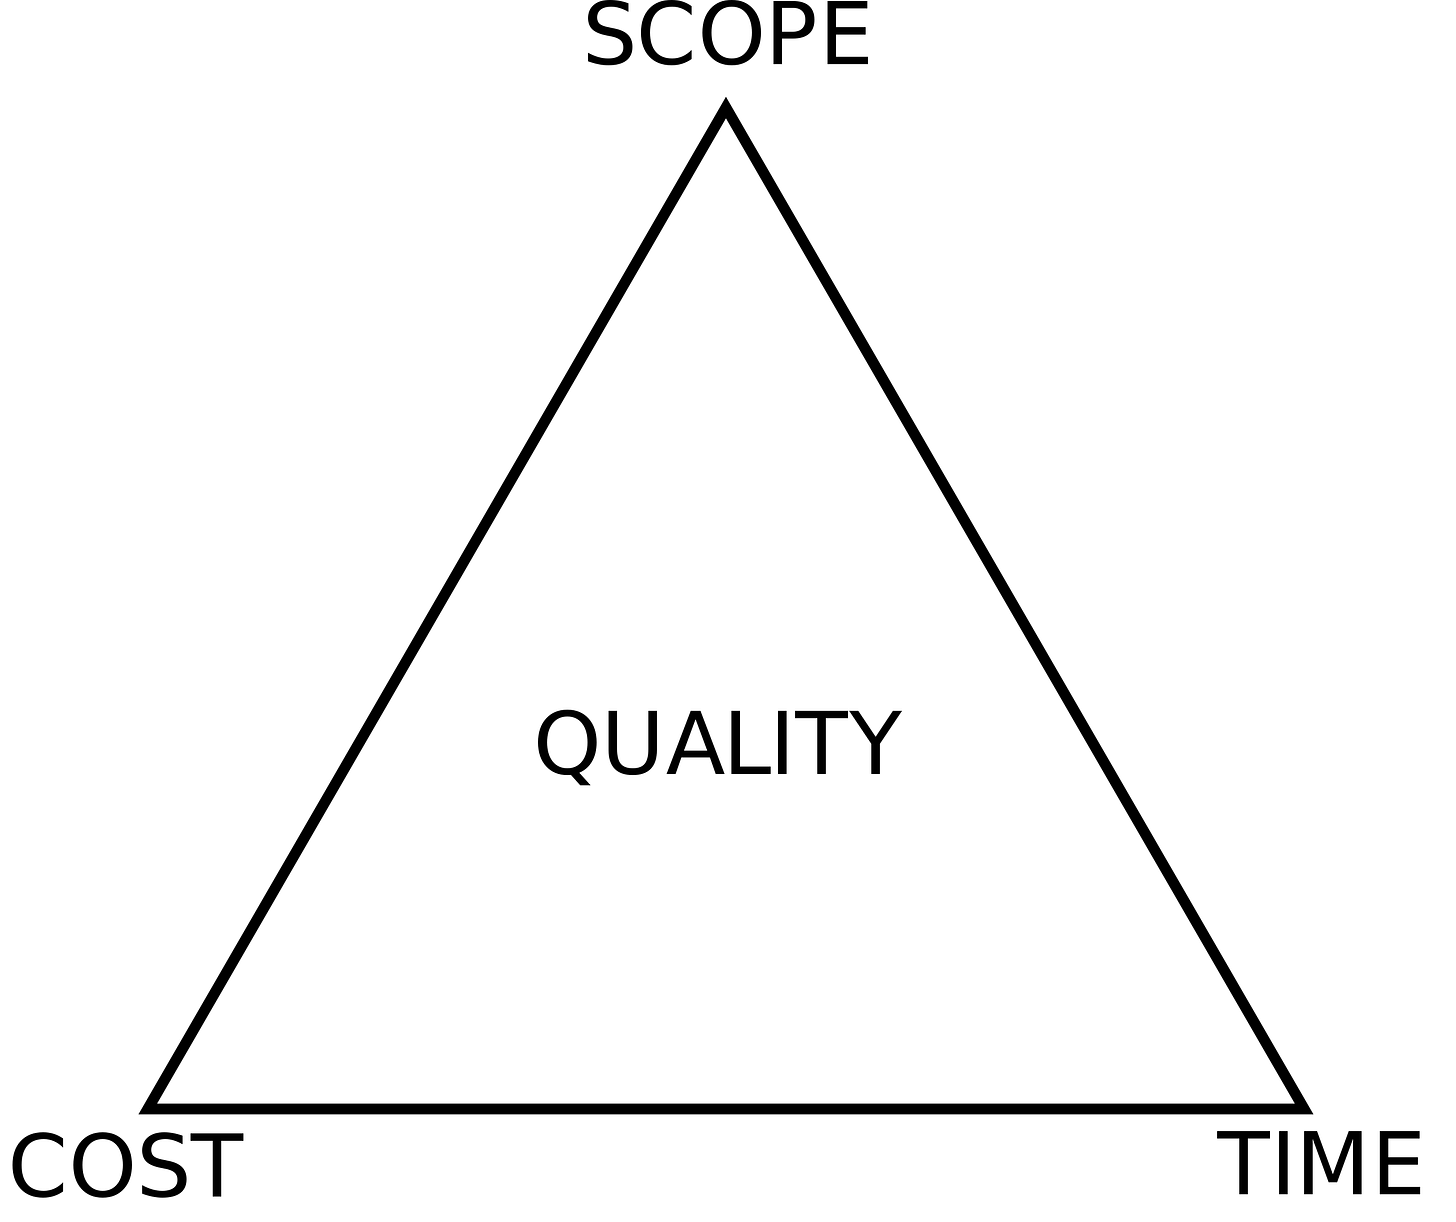 The cost/time/scope triangle